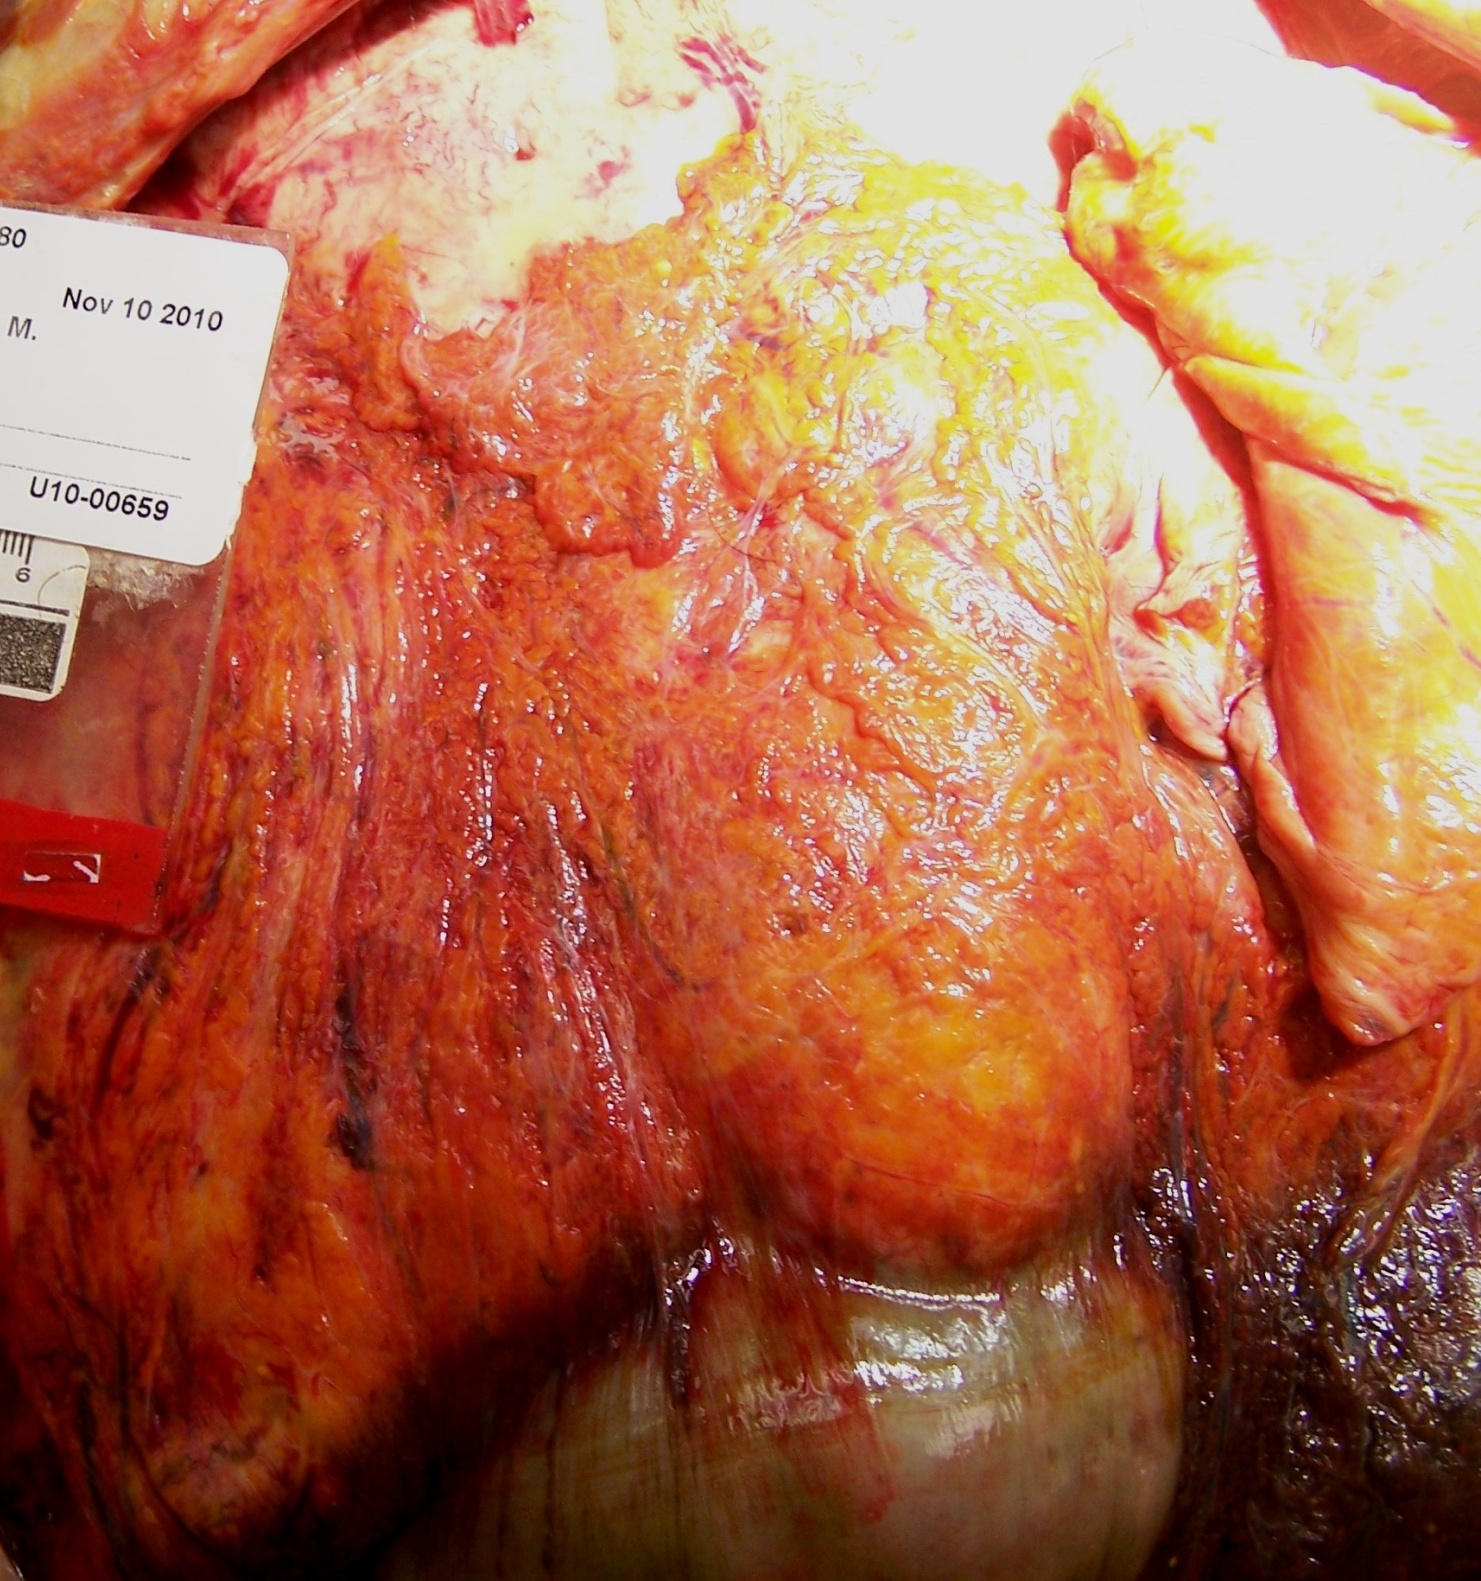 Gross image - Autopsy image, liver in situ (Click to enlarge)